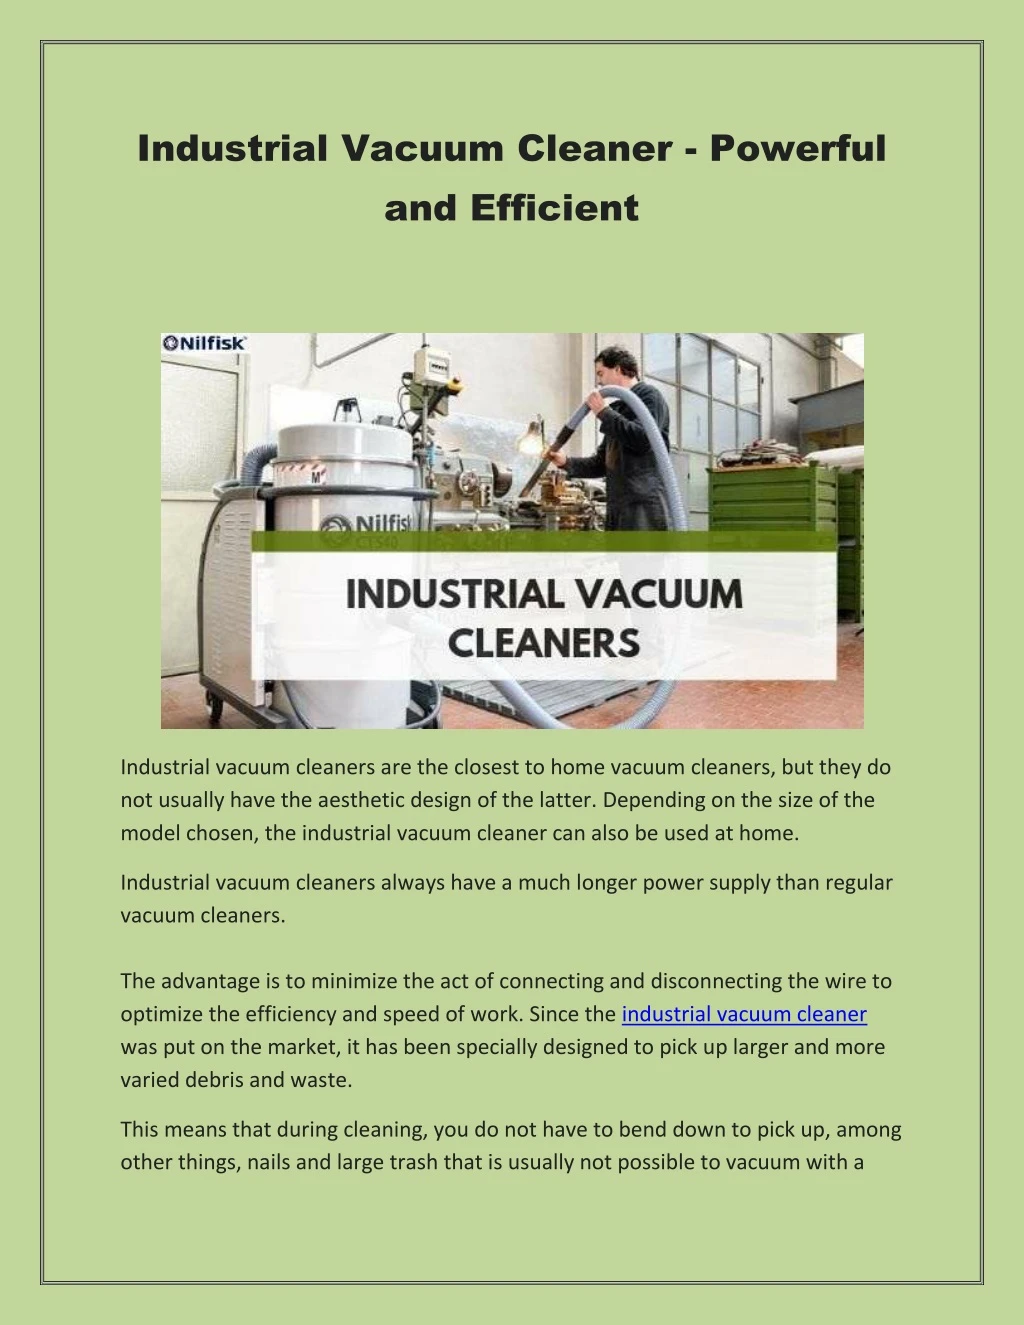 industrial vacuum cleaner powerful and efficient